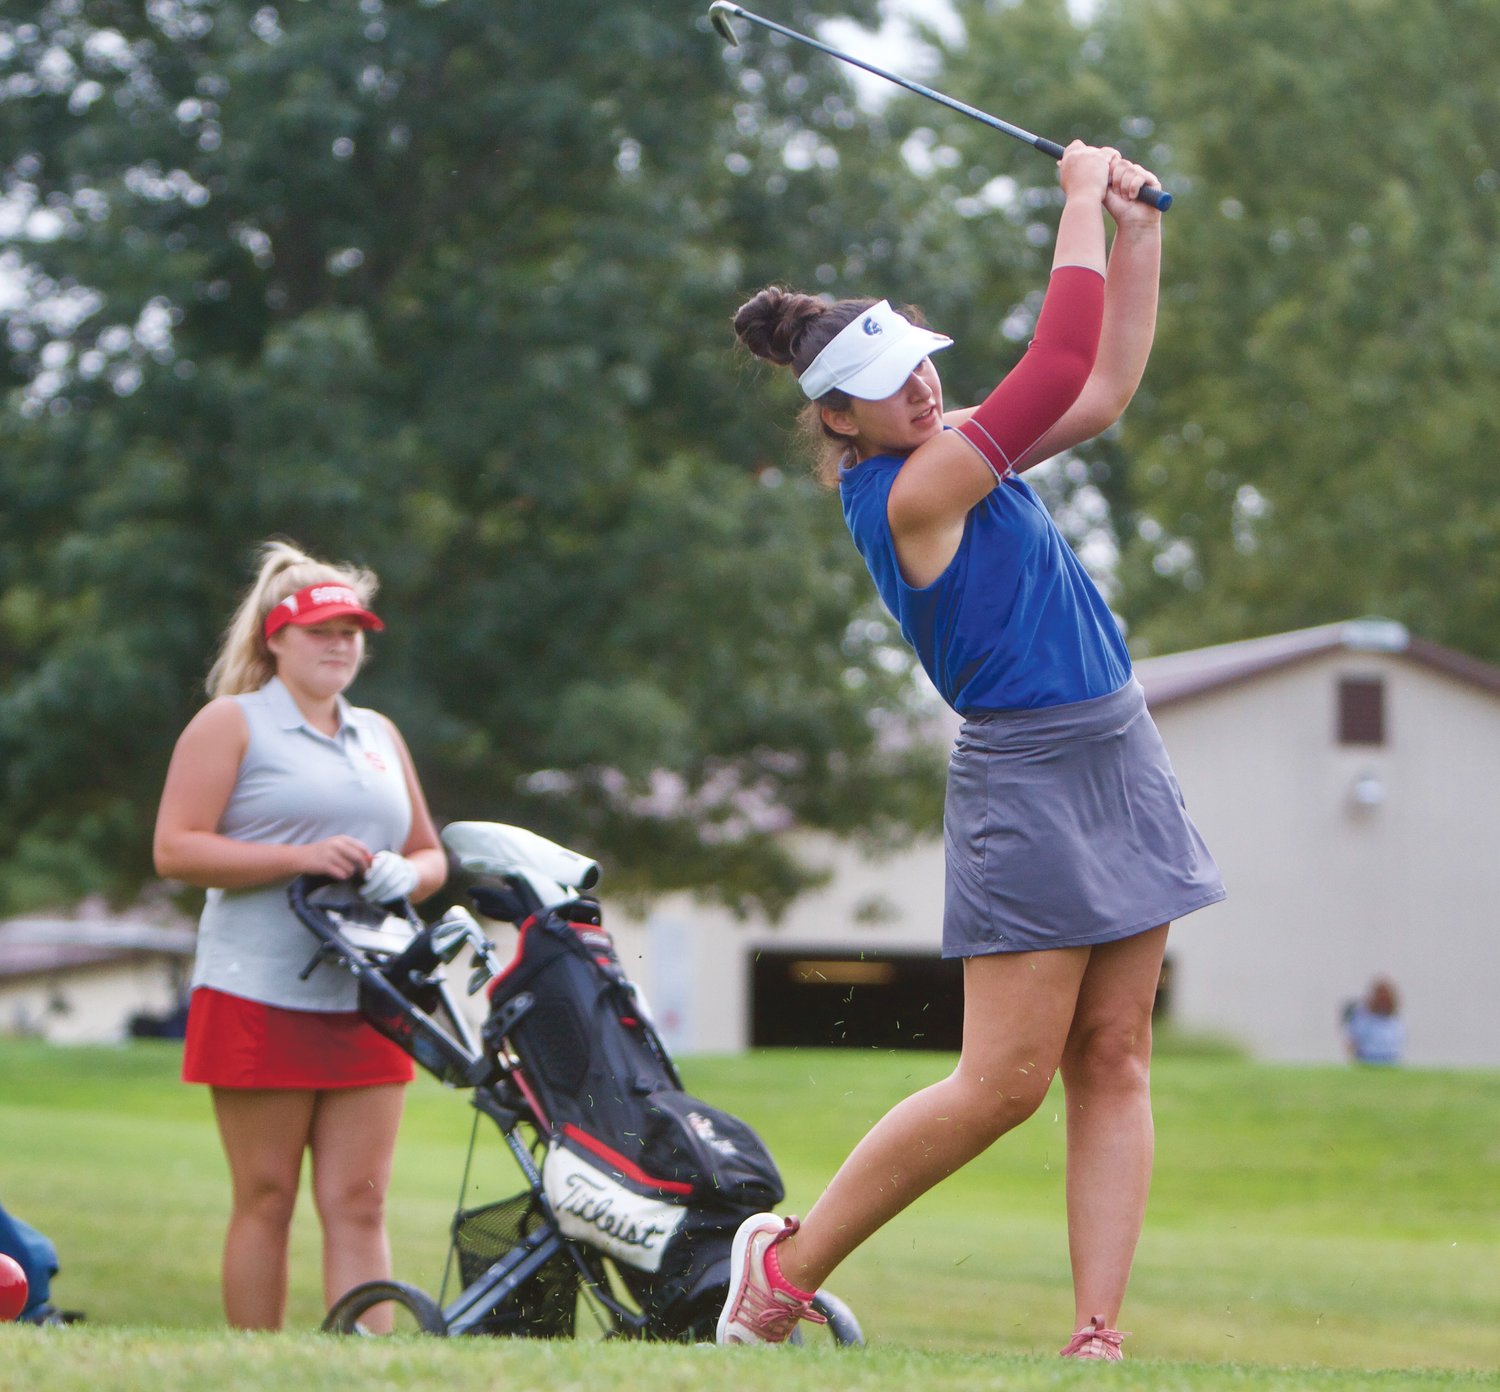 Crawfordsville senior Bailey Mittal led the Athenians to a county title with a 43 as the medalist on Wednesday evening.